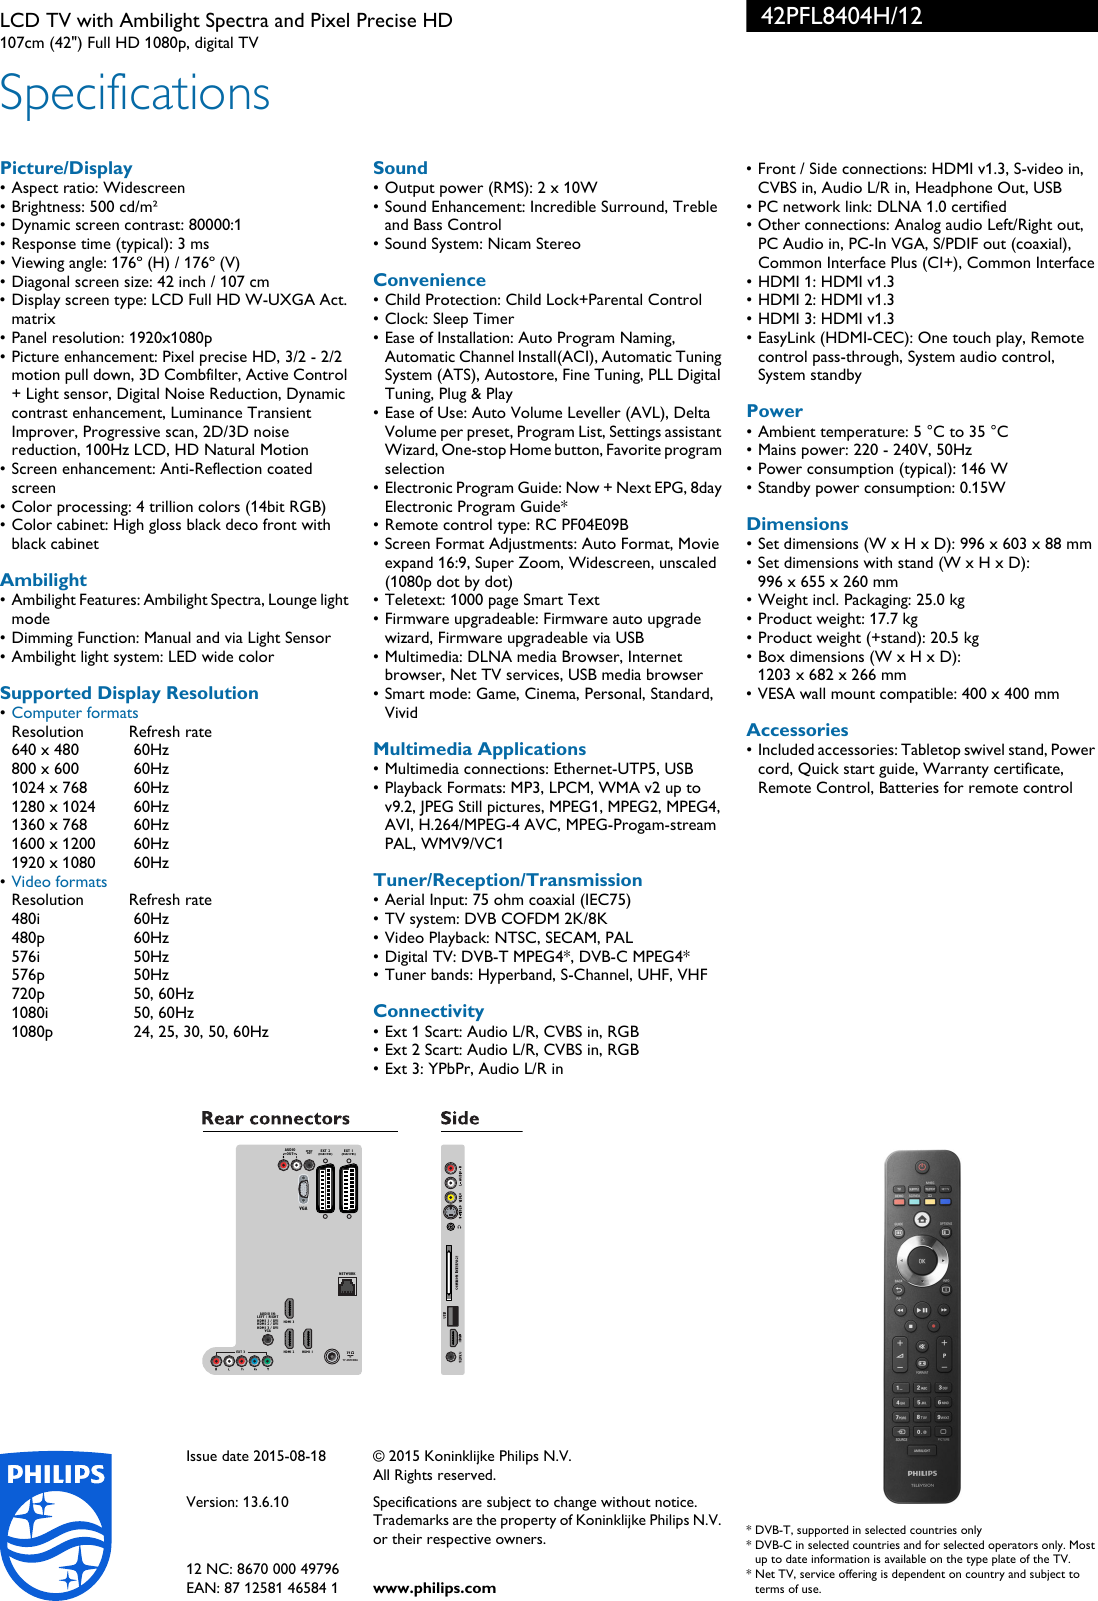 Page 3 of 3 - Philips 42PFL8404H/12 LCD TV With Ambilight Spectra And Pixel Precise HD User Manual Informacinis Lapelis 42pfl8404h 12 Pss